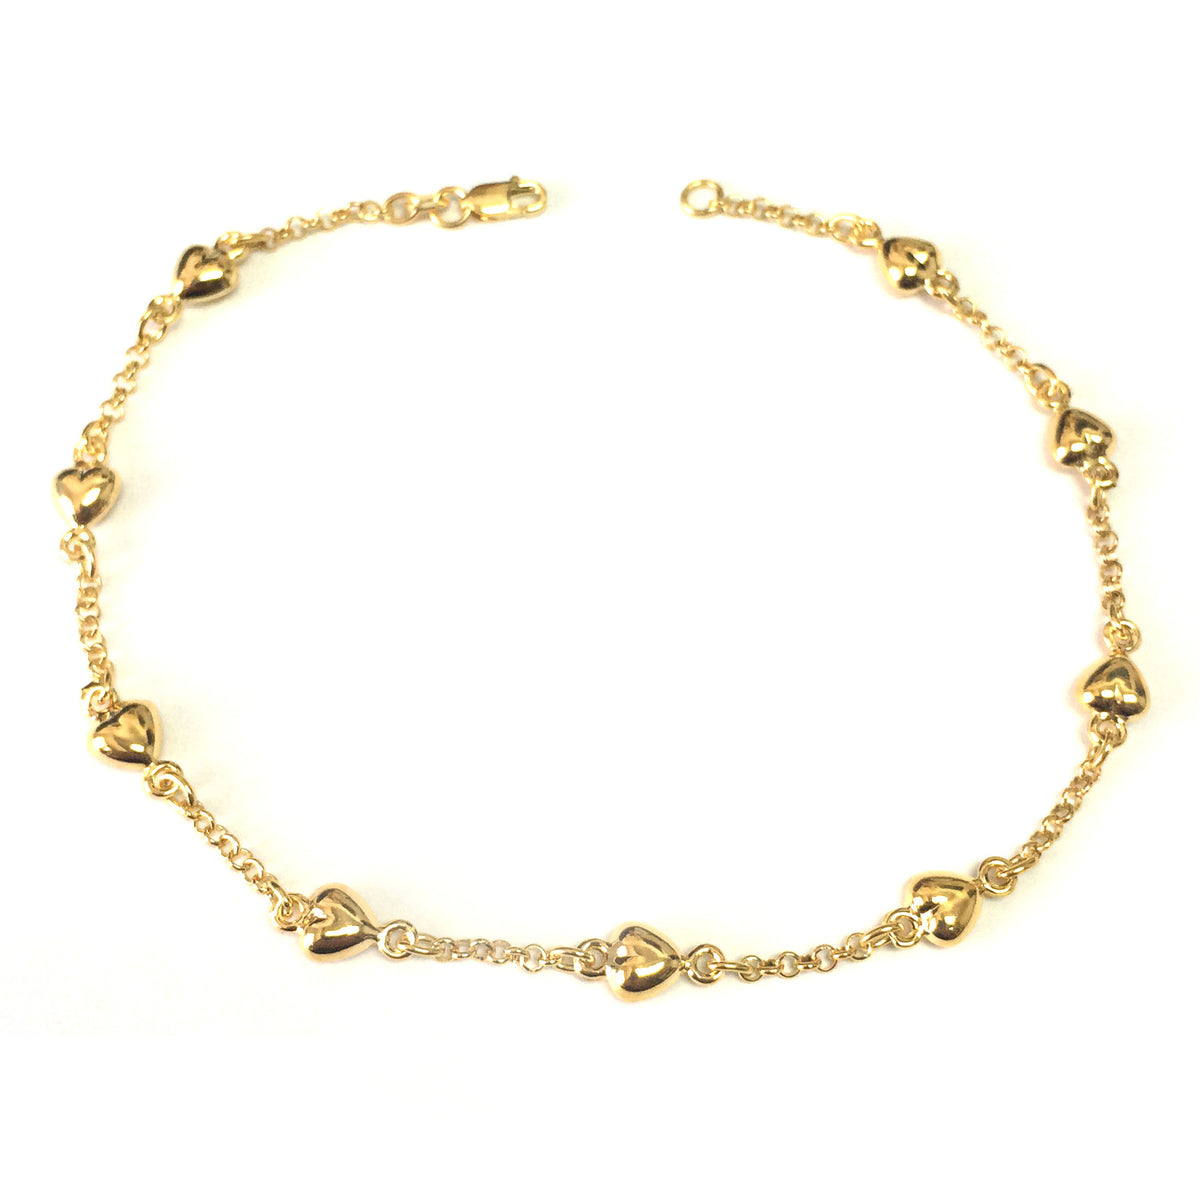 14K Yellow Gold Puffed Hearts Anklet, 10" fine designer jewelry for men and women